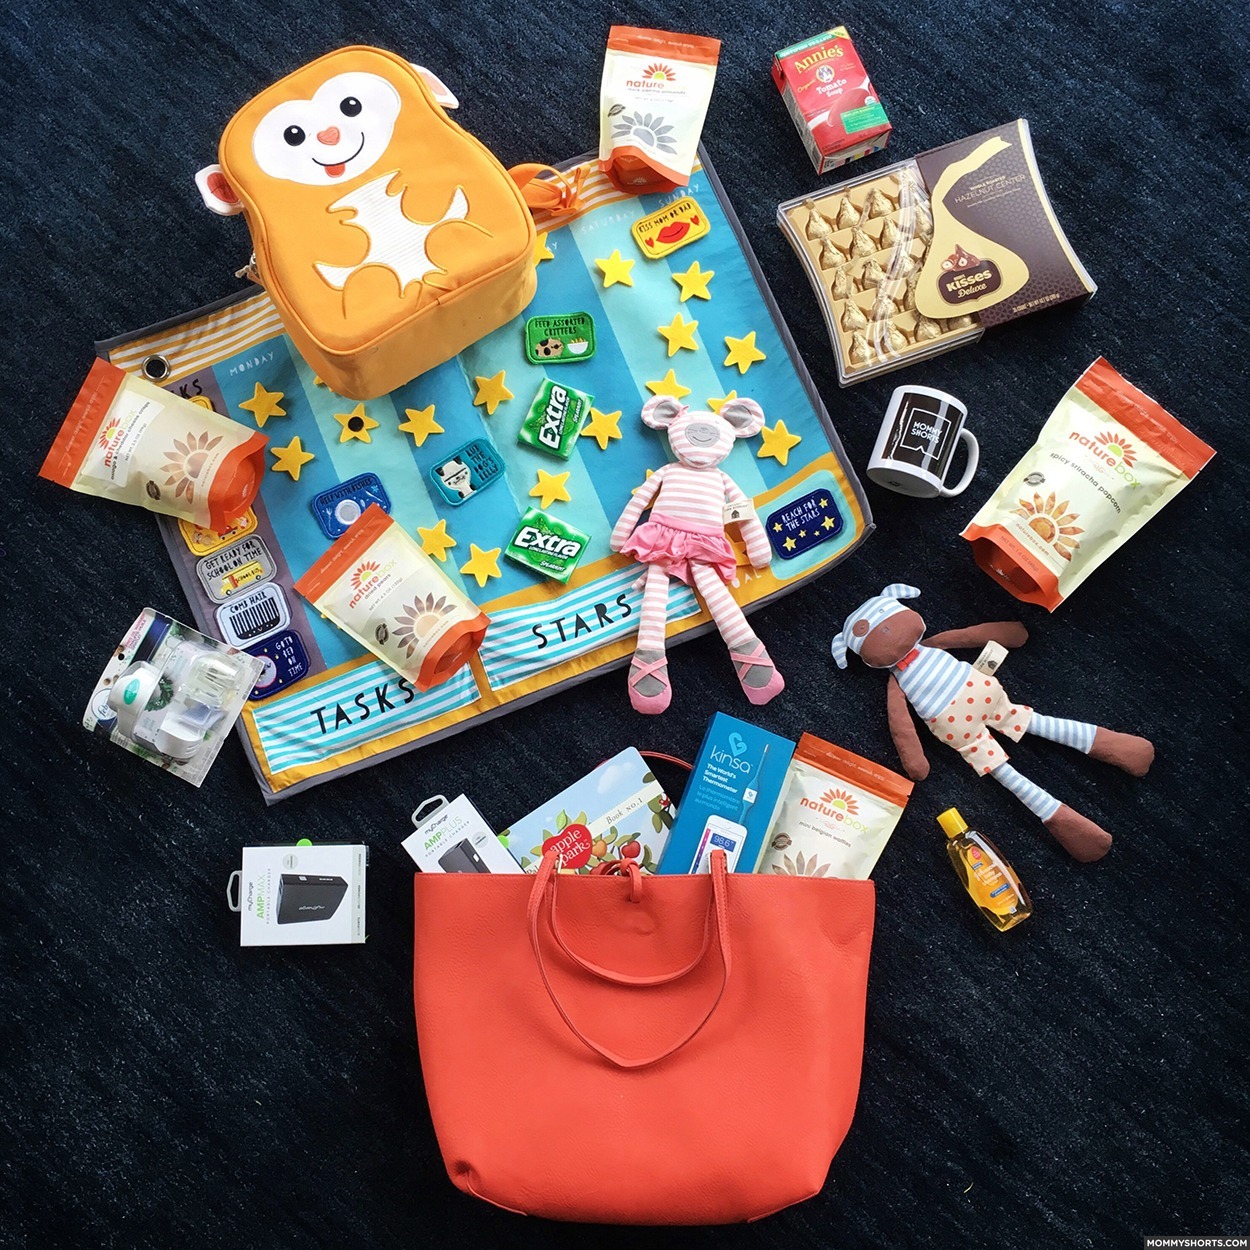 The Launch of the Mommy Shorts Swag Bag